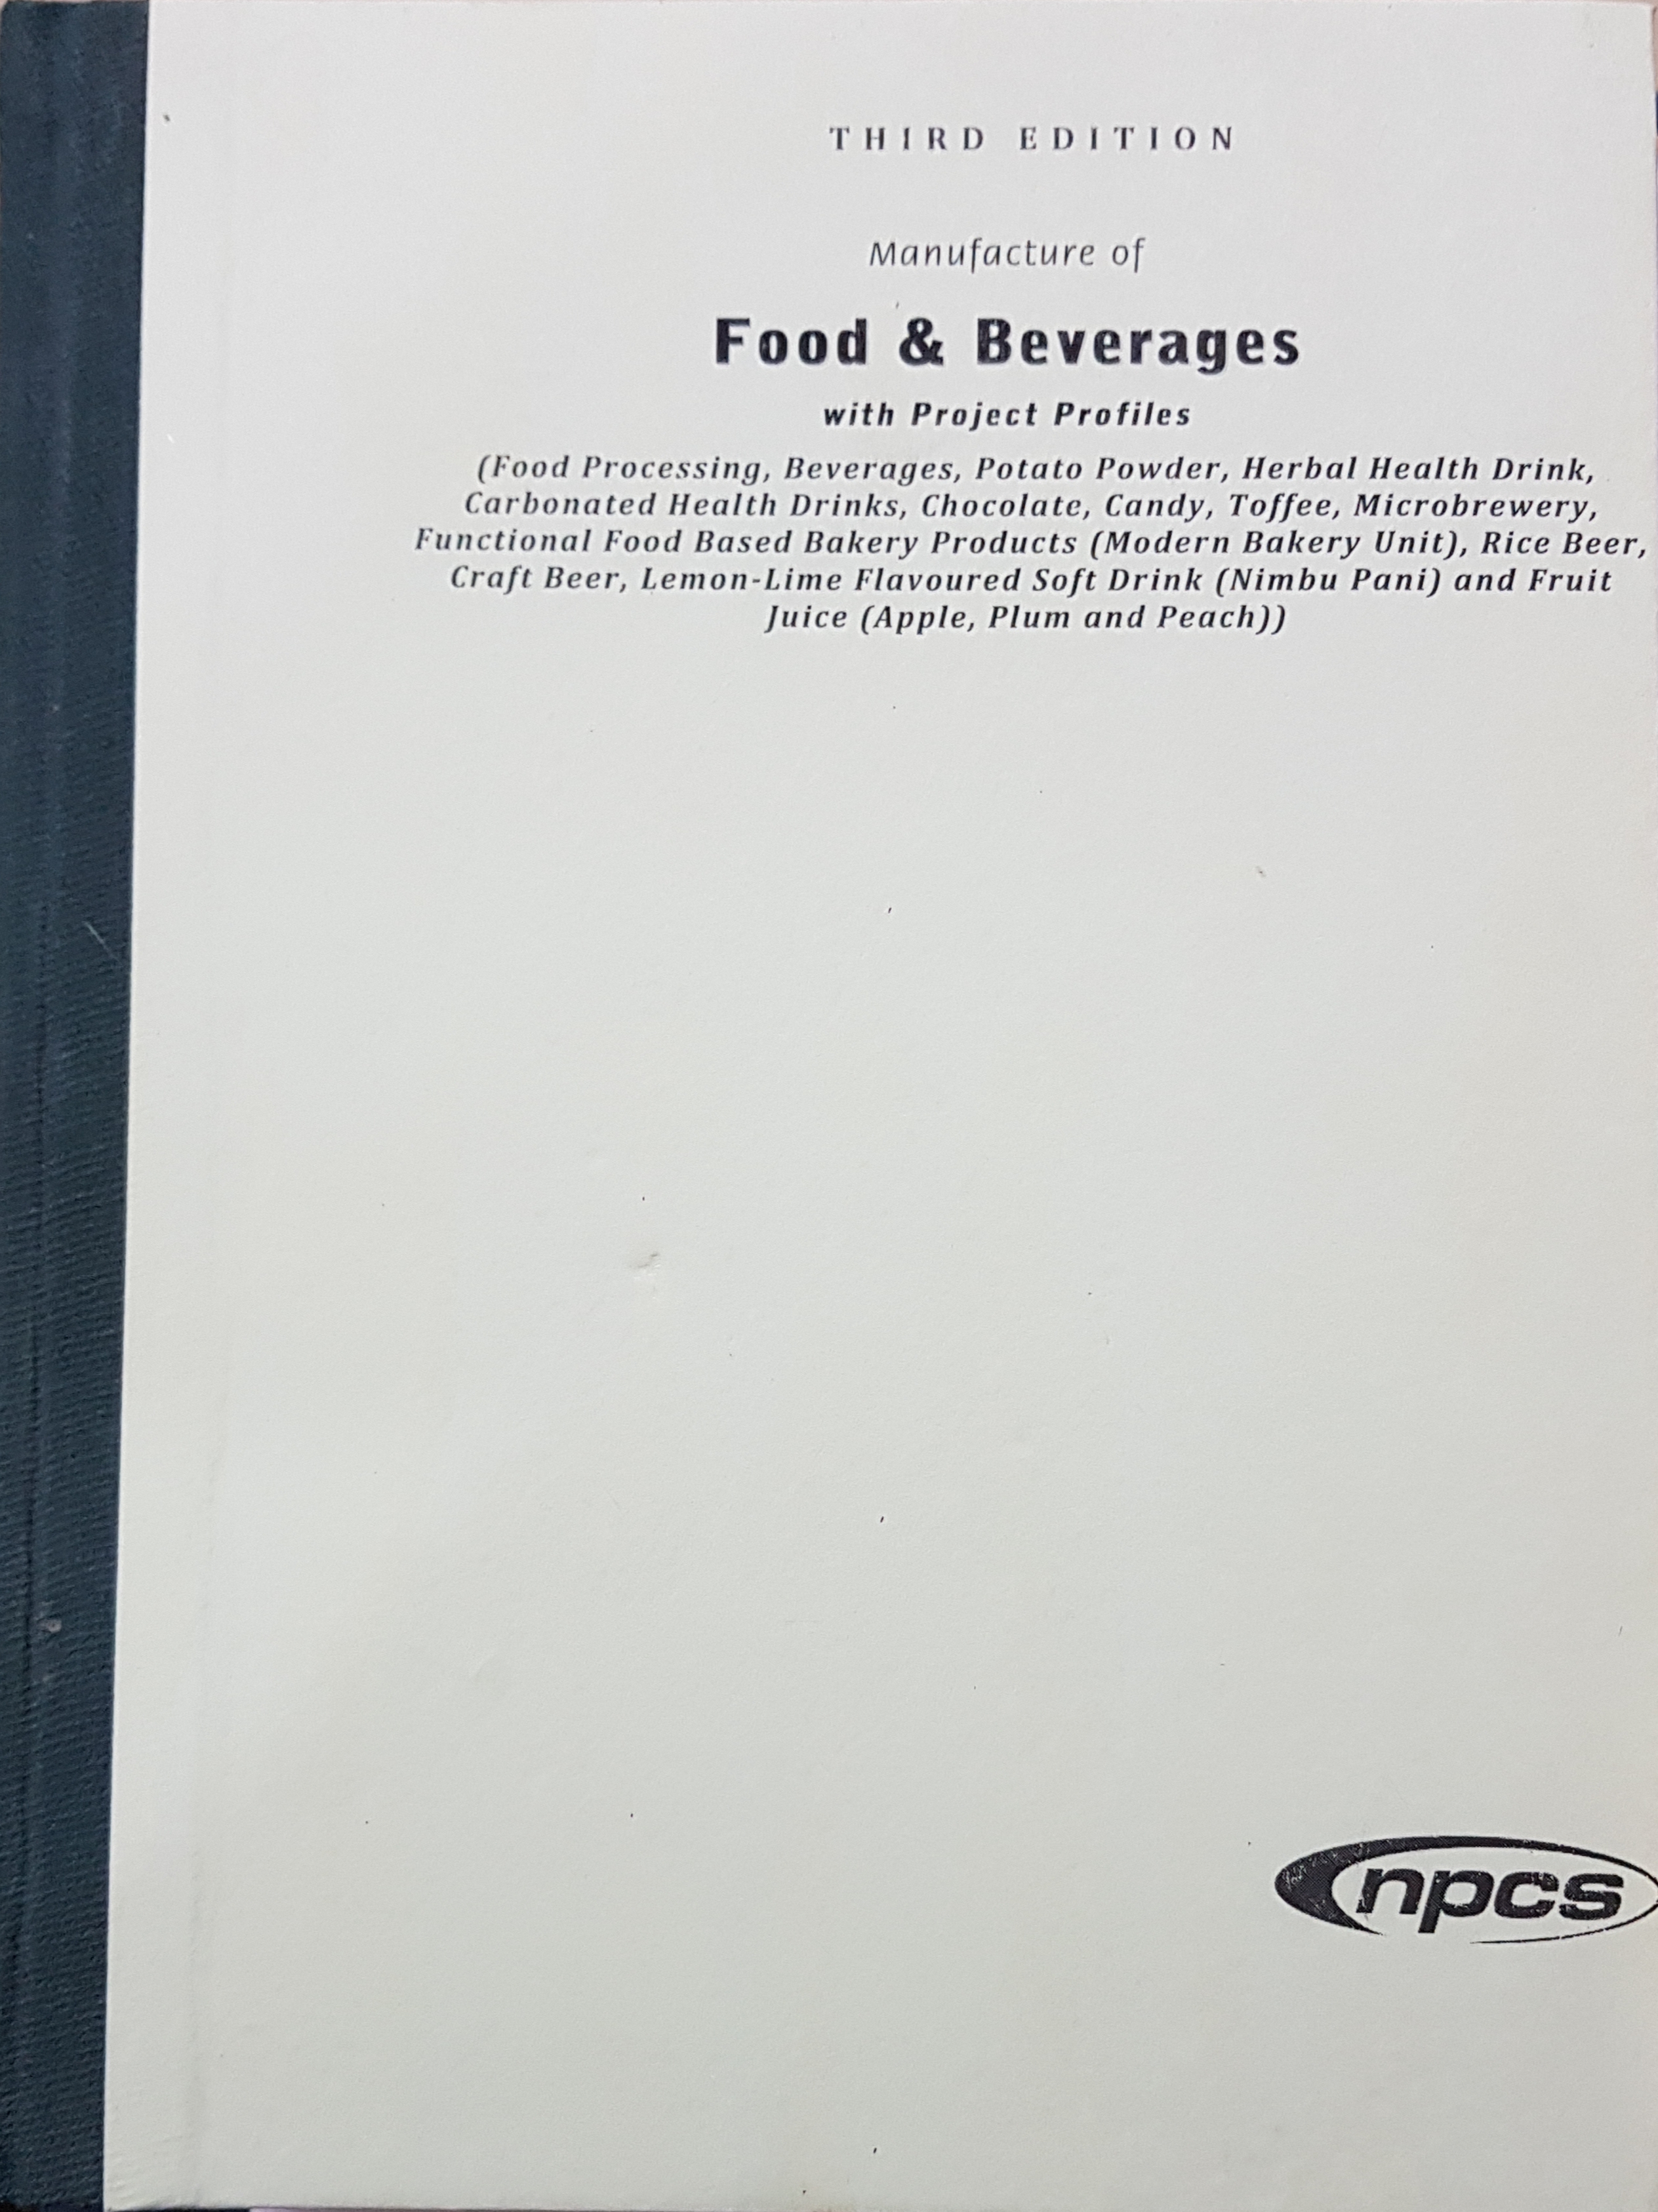 Manufacture of Food & Beverages with Project Profiles (3rd Edn.)